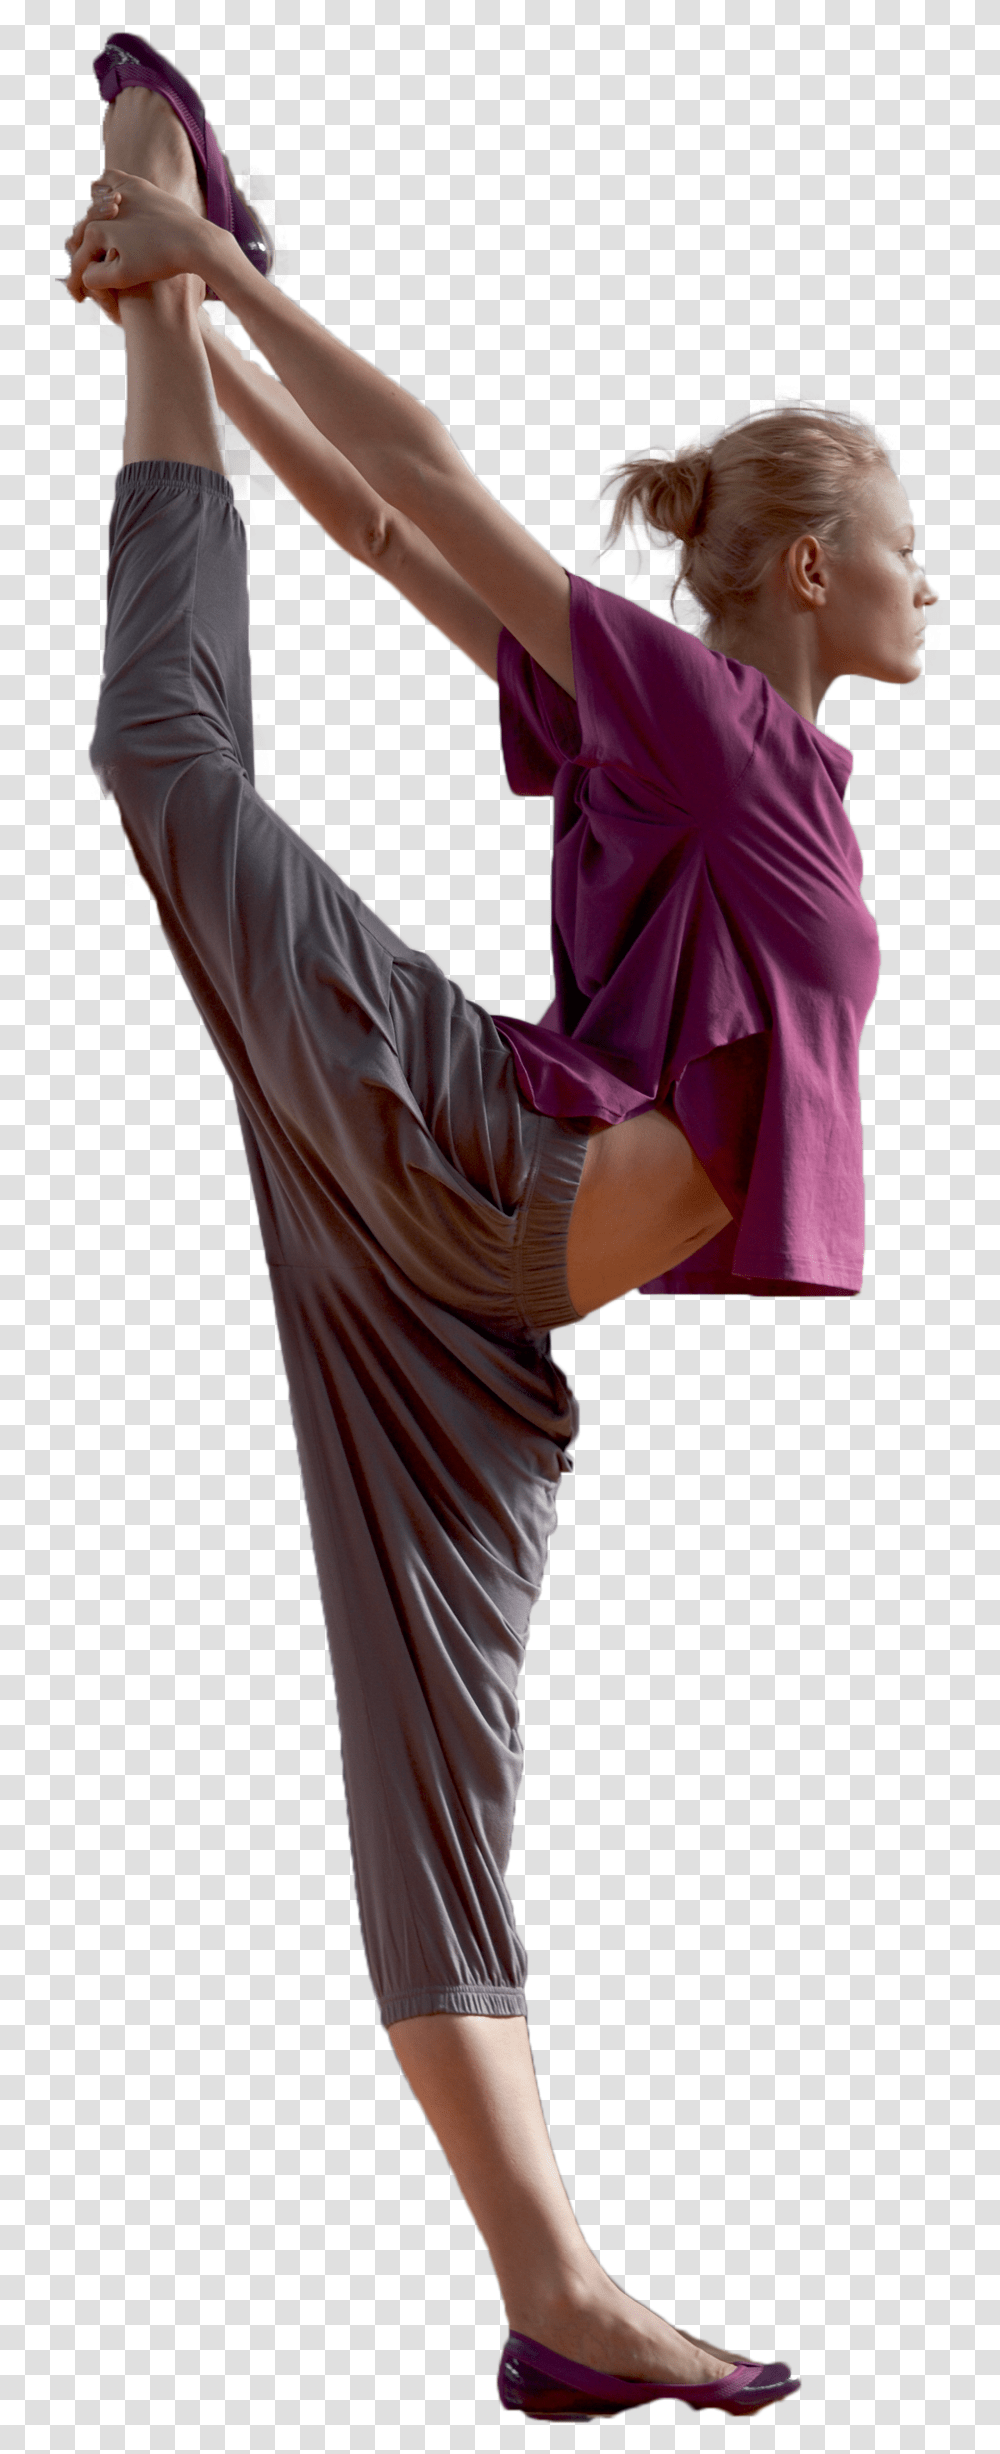 People For Architecture Presentations Yoga Cut Out People, Sleeve, Apparel, Dance Pose Transparent Png